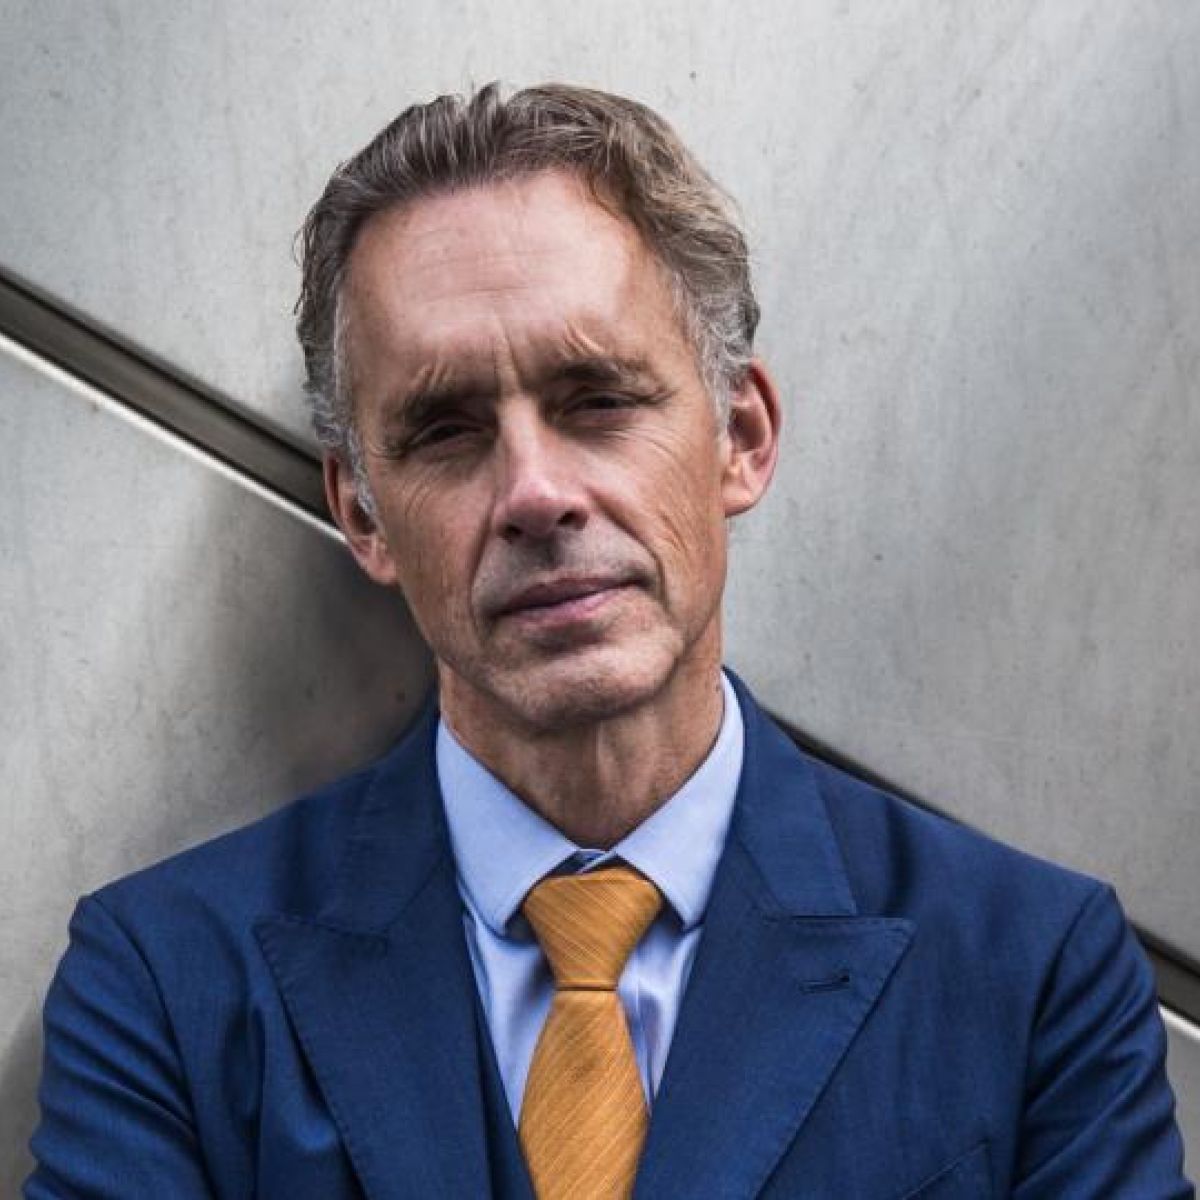 Jordan Peterson: 'What the hell's with self-help books?'